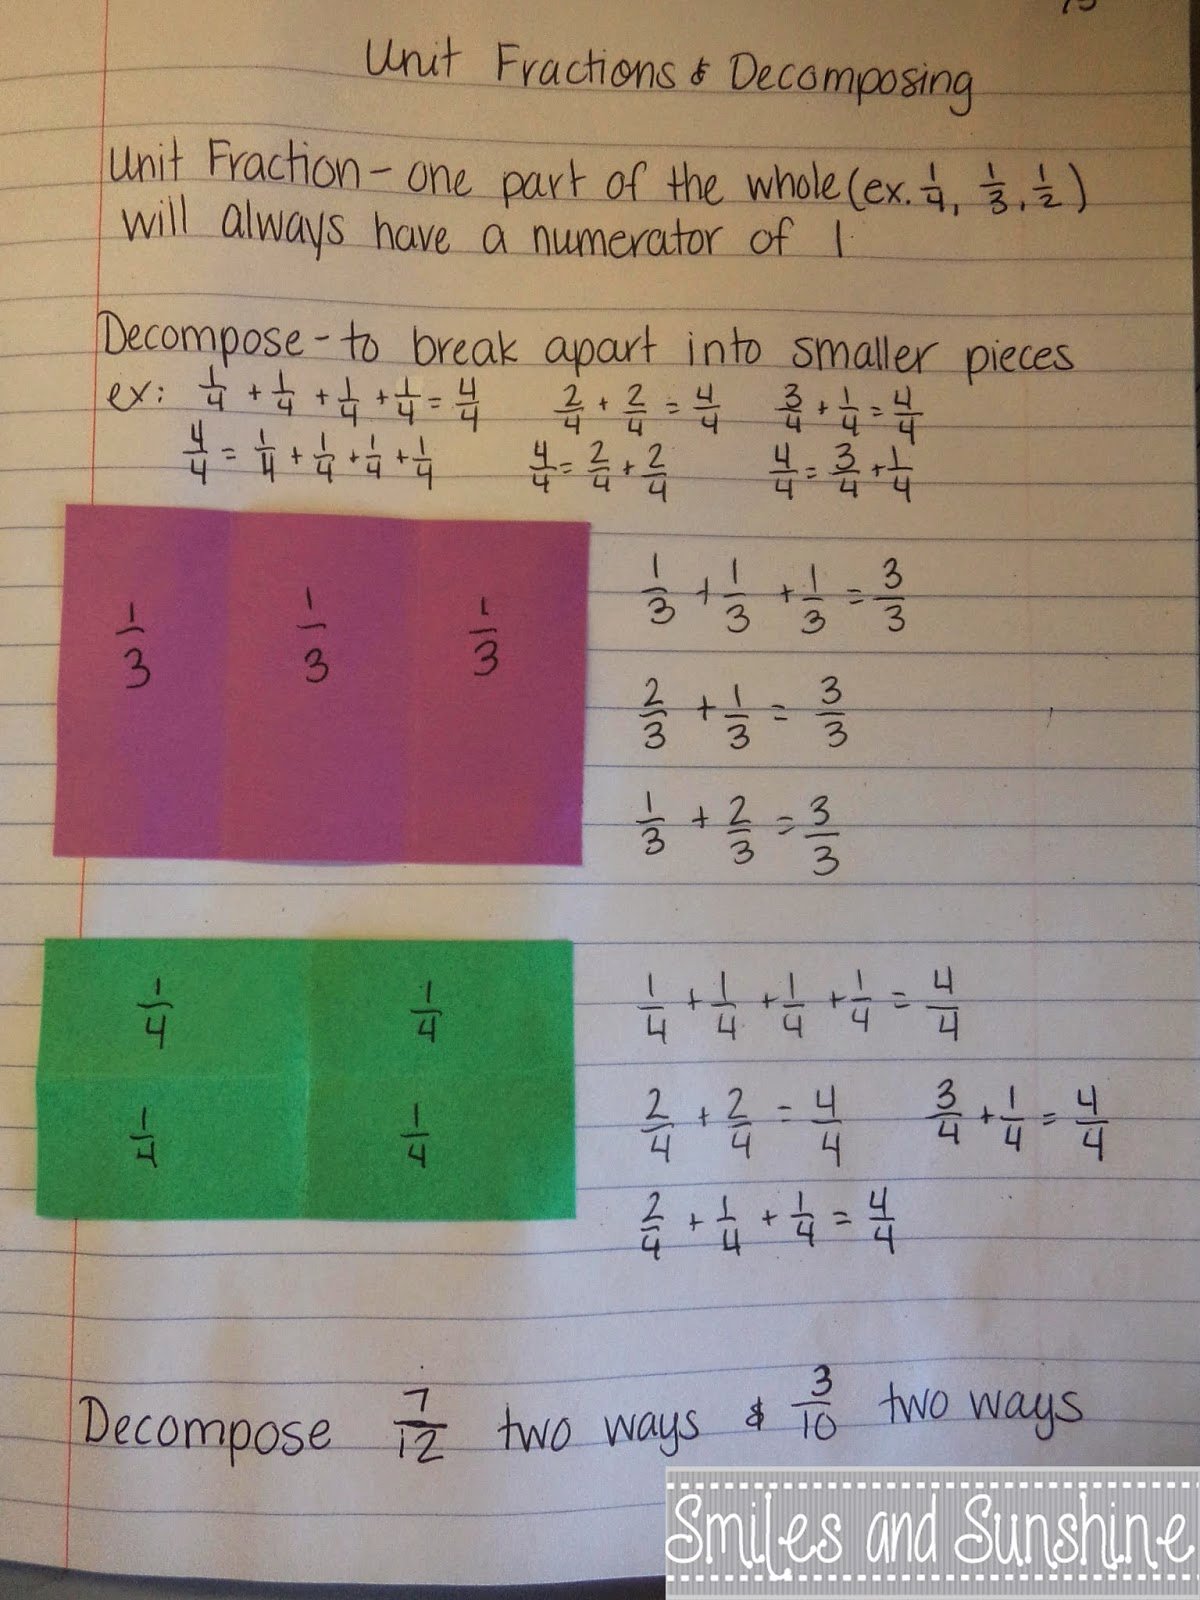 Decomposing Fractions 4th Grade Worksheet Inspirational Smiles and Sunshine More Fraction Fun Unit Fractions and